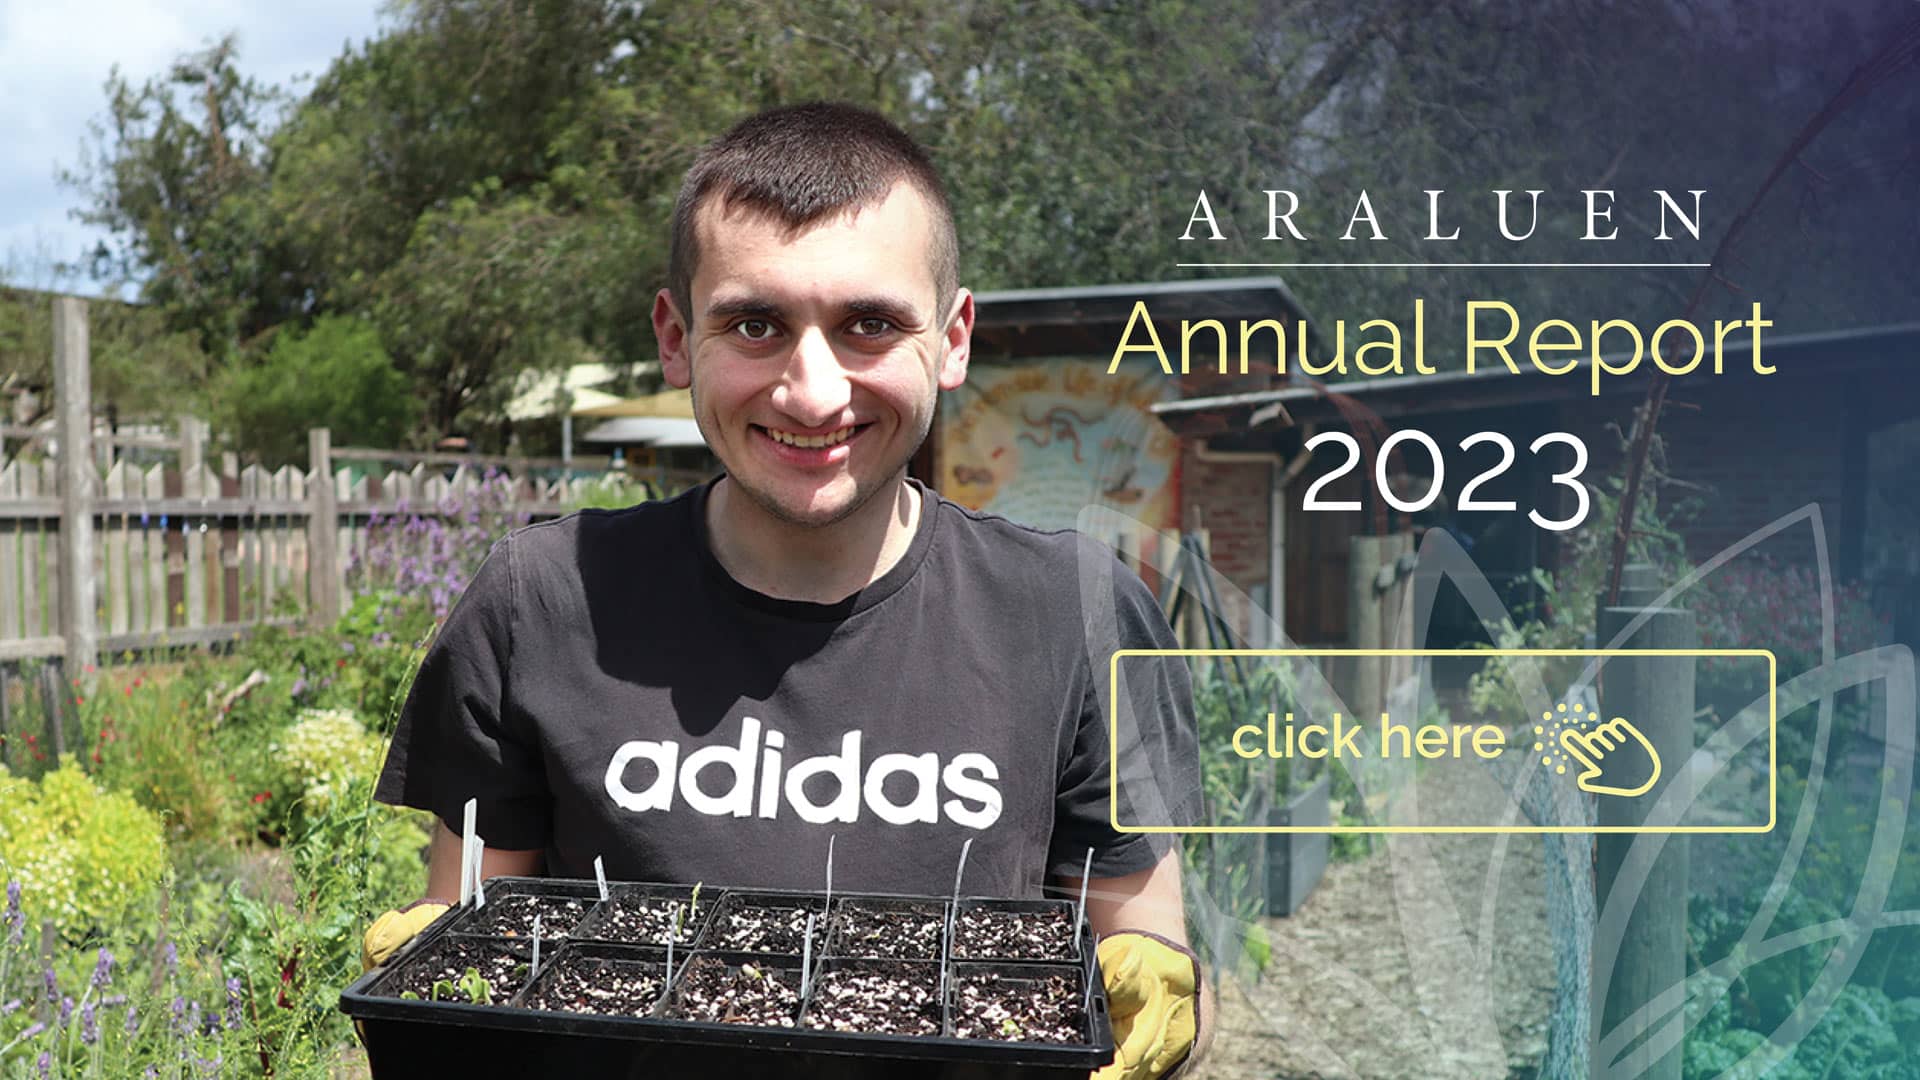 photo of a man in a vegetable garden holding a tray of seedlings and smiling with text saying Araluen Annual Report 2023 click here